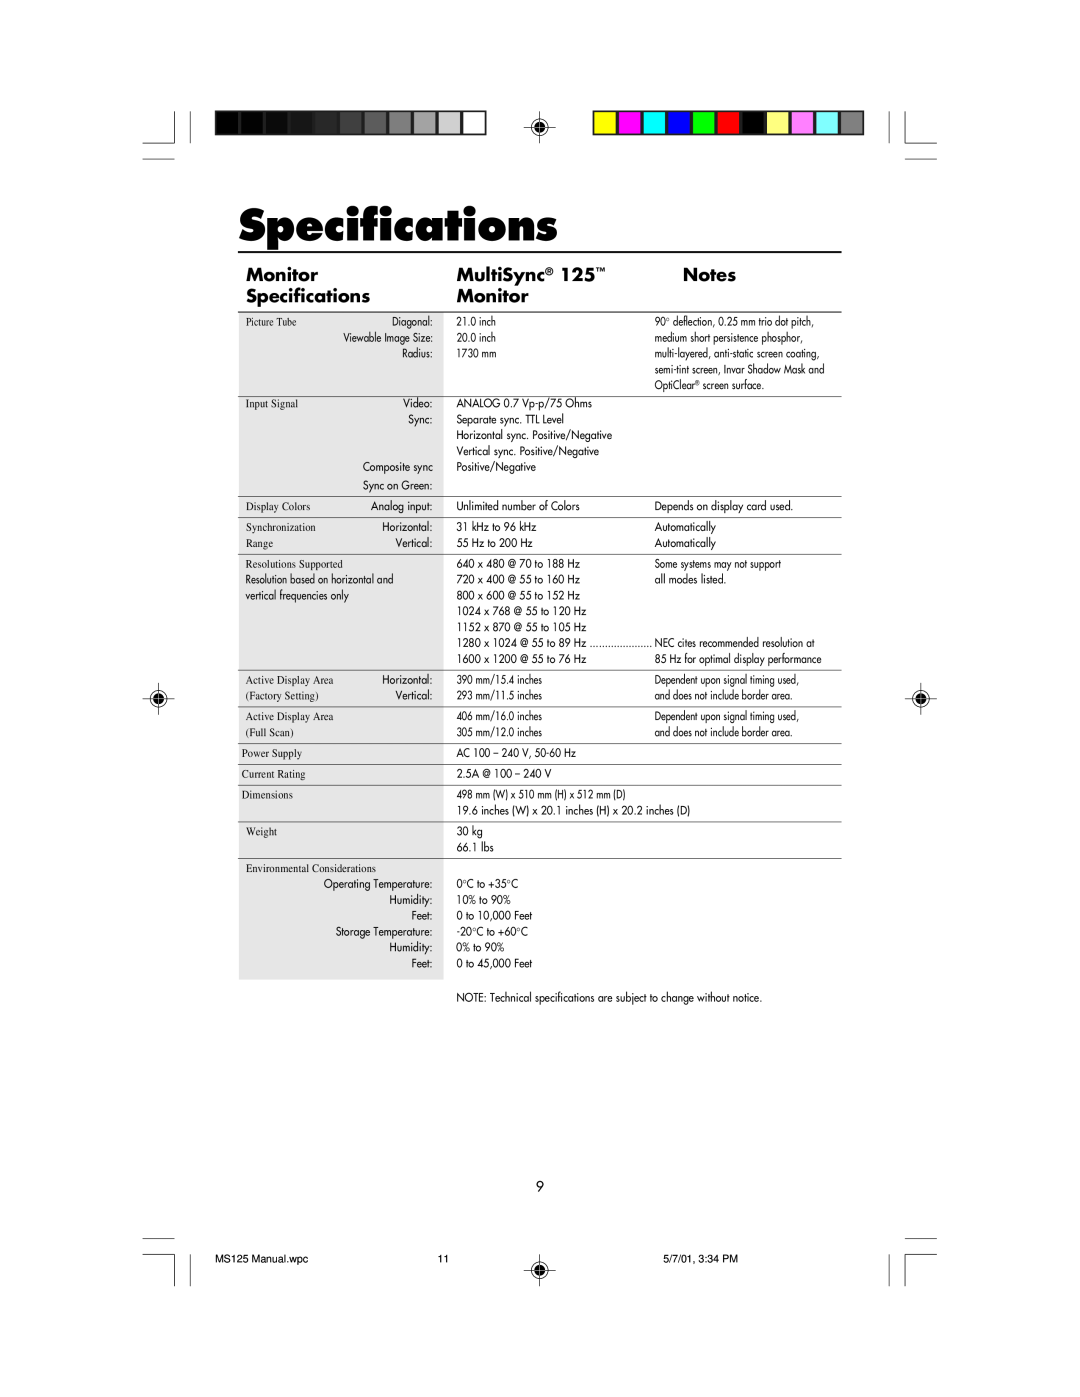 NEC MS125 manual Specifications, Monitor, MultiSync 